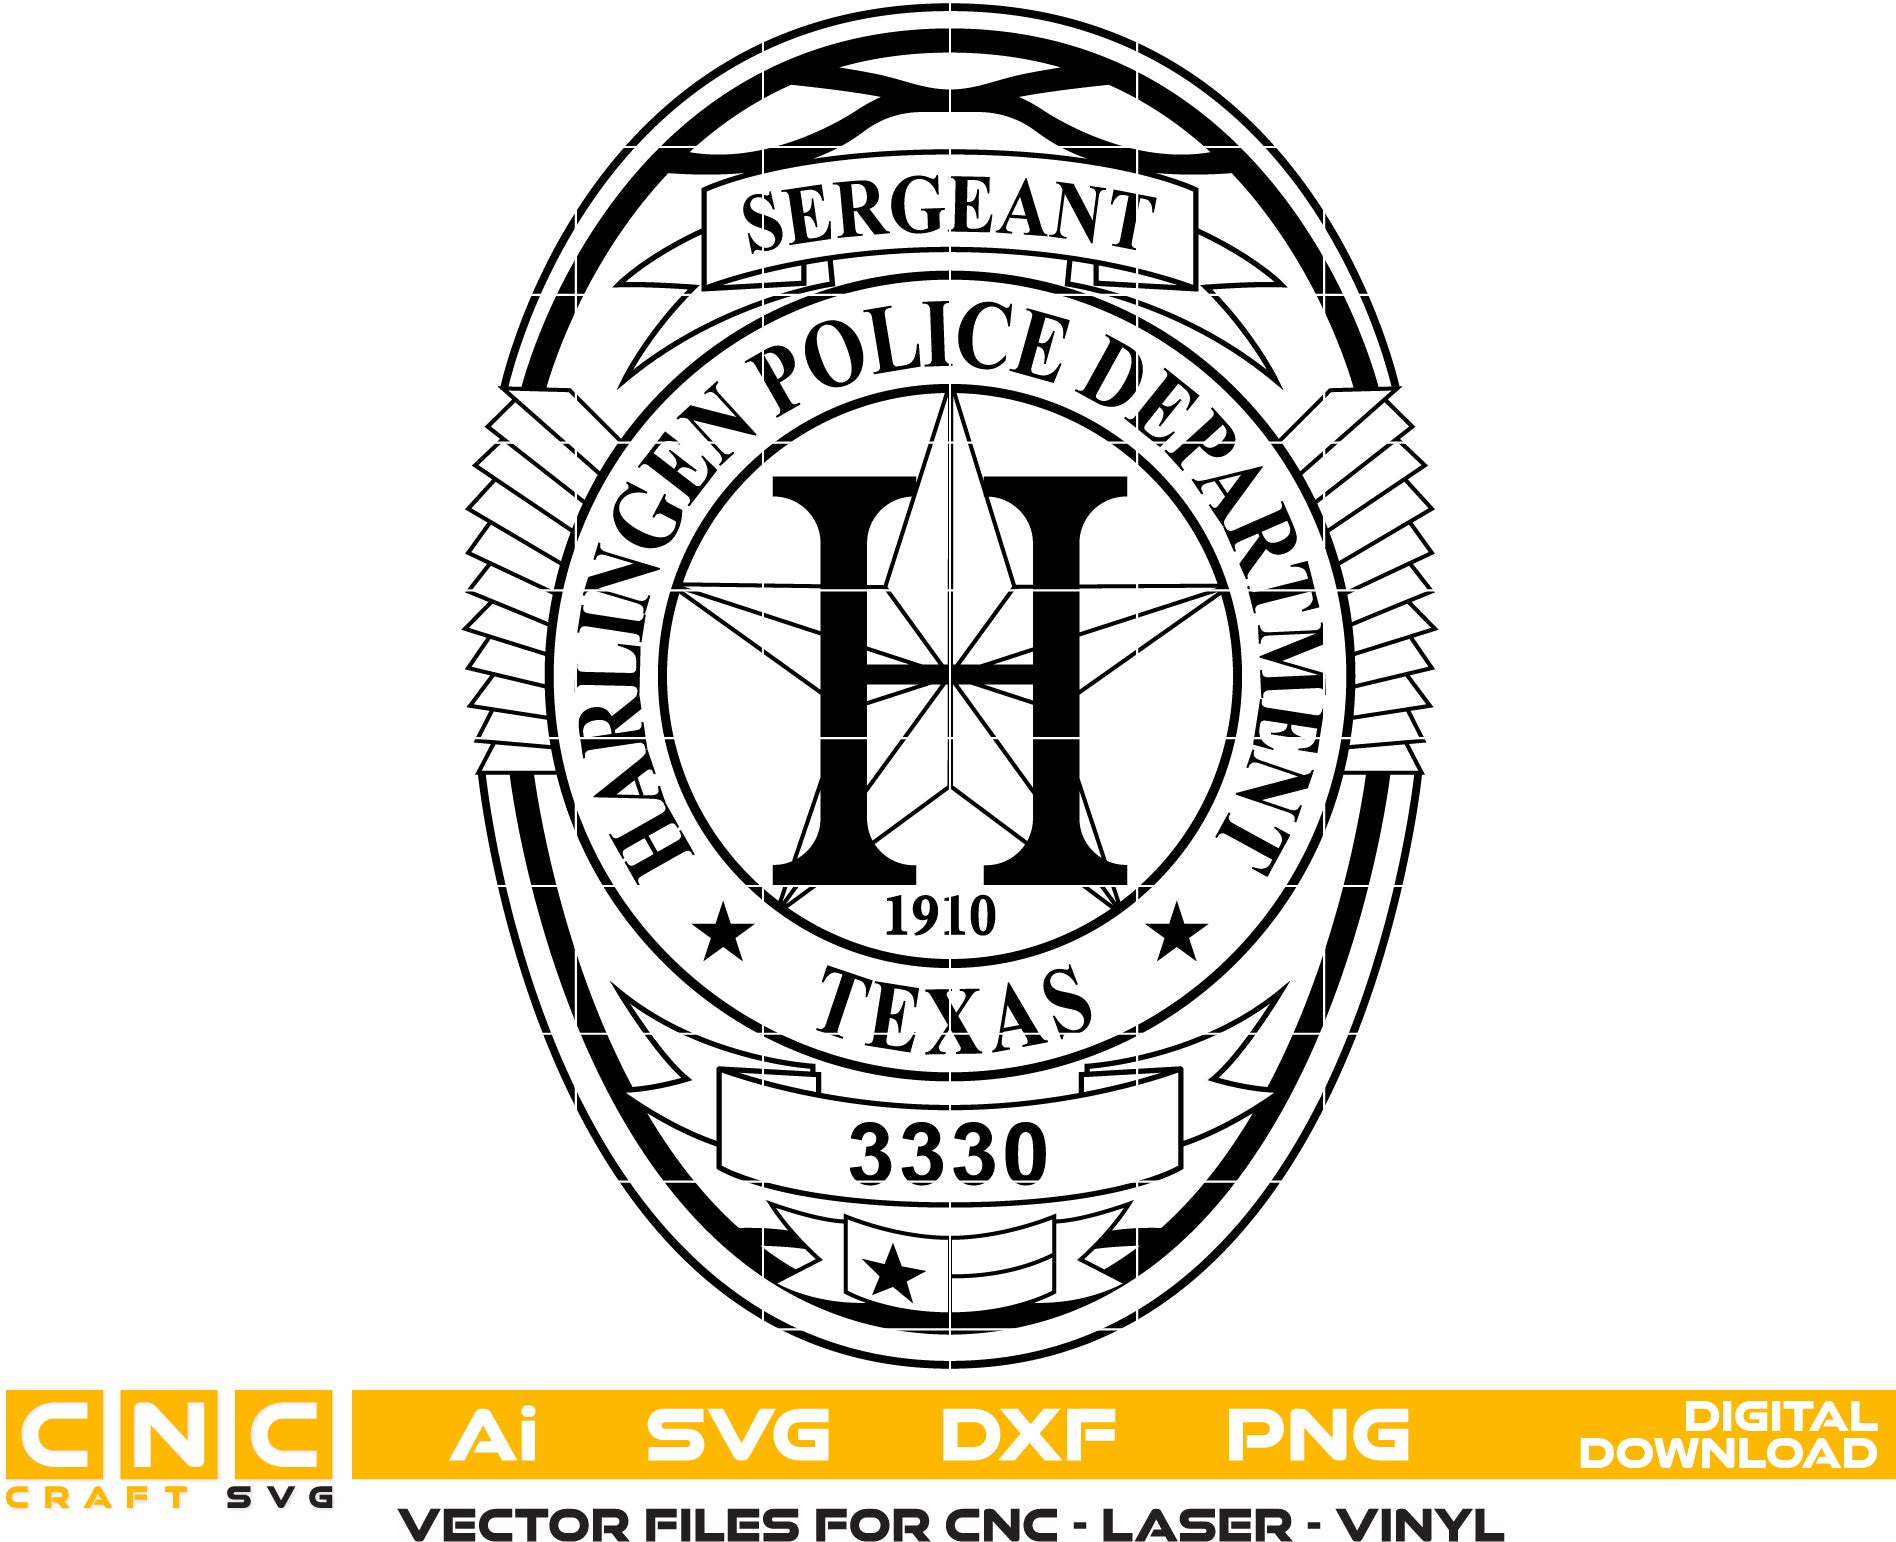 State of Texas Harlingen Police Badge Vector Art, Ai,SVG, DXF, PNG, Digital Files for Laser Engraving, Woodworking, Printing, CNC Router, Cricut, Ezecad etc.